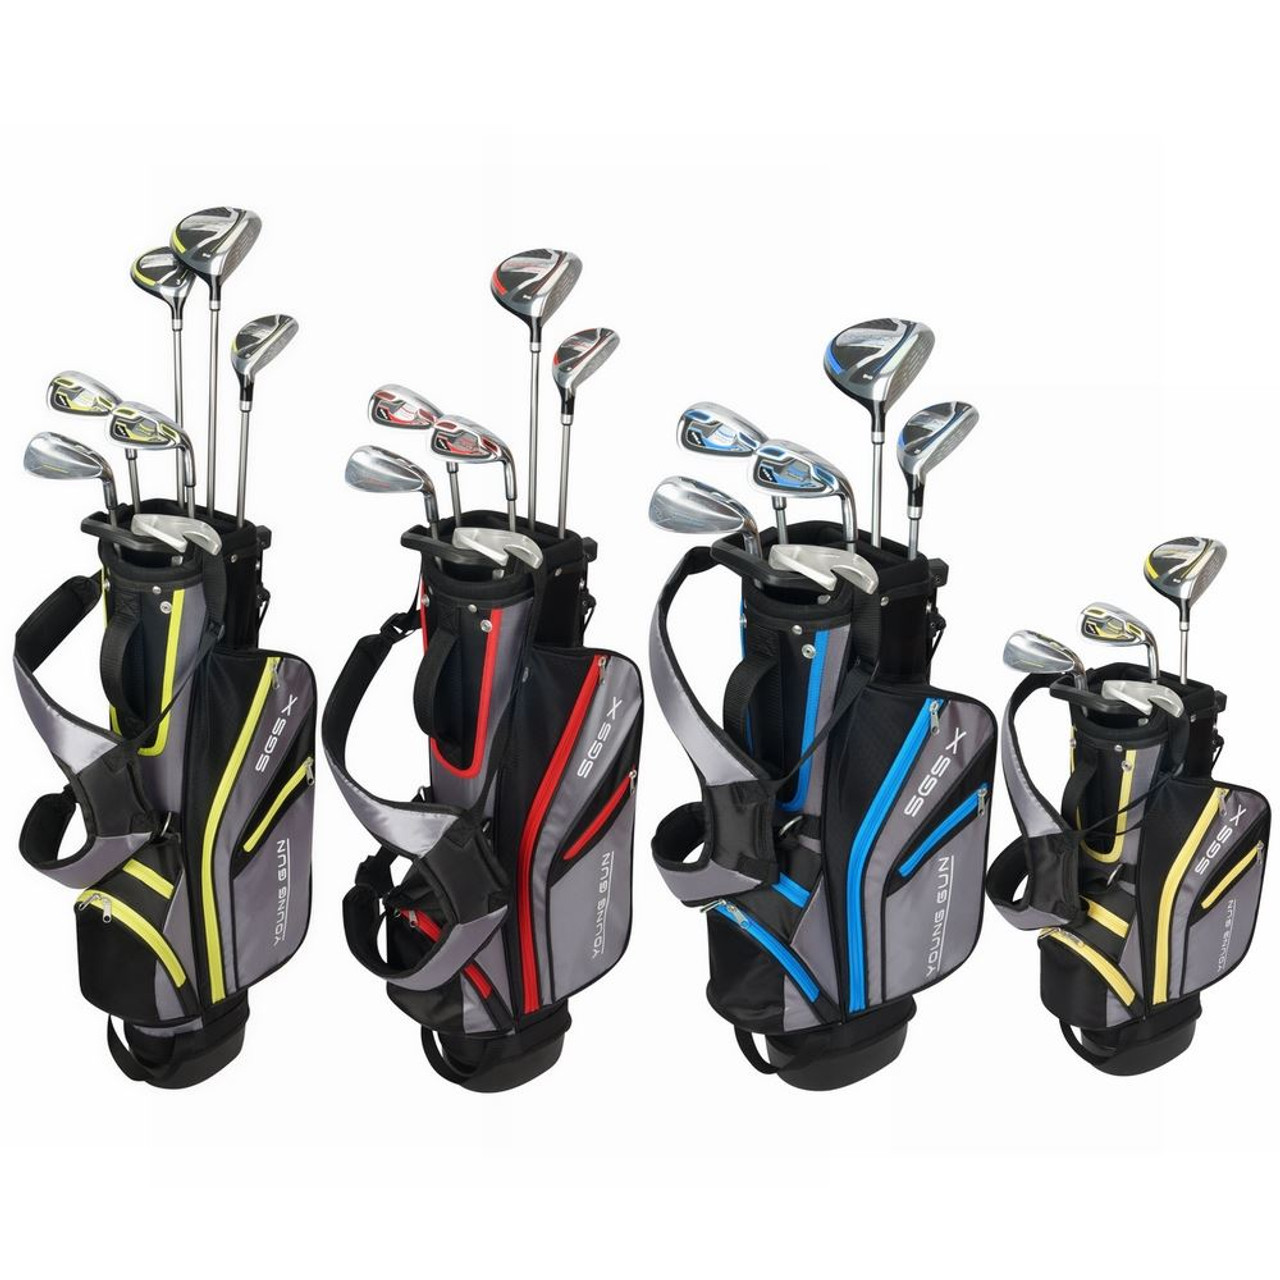 Young Gun SGS x Ace Junior Golf Clubs Set with Bag, Right Hand, Yellow Ages 3-5